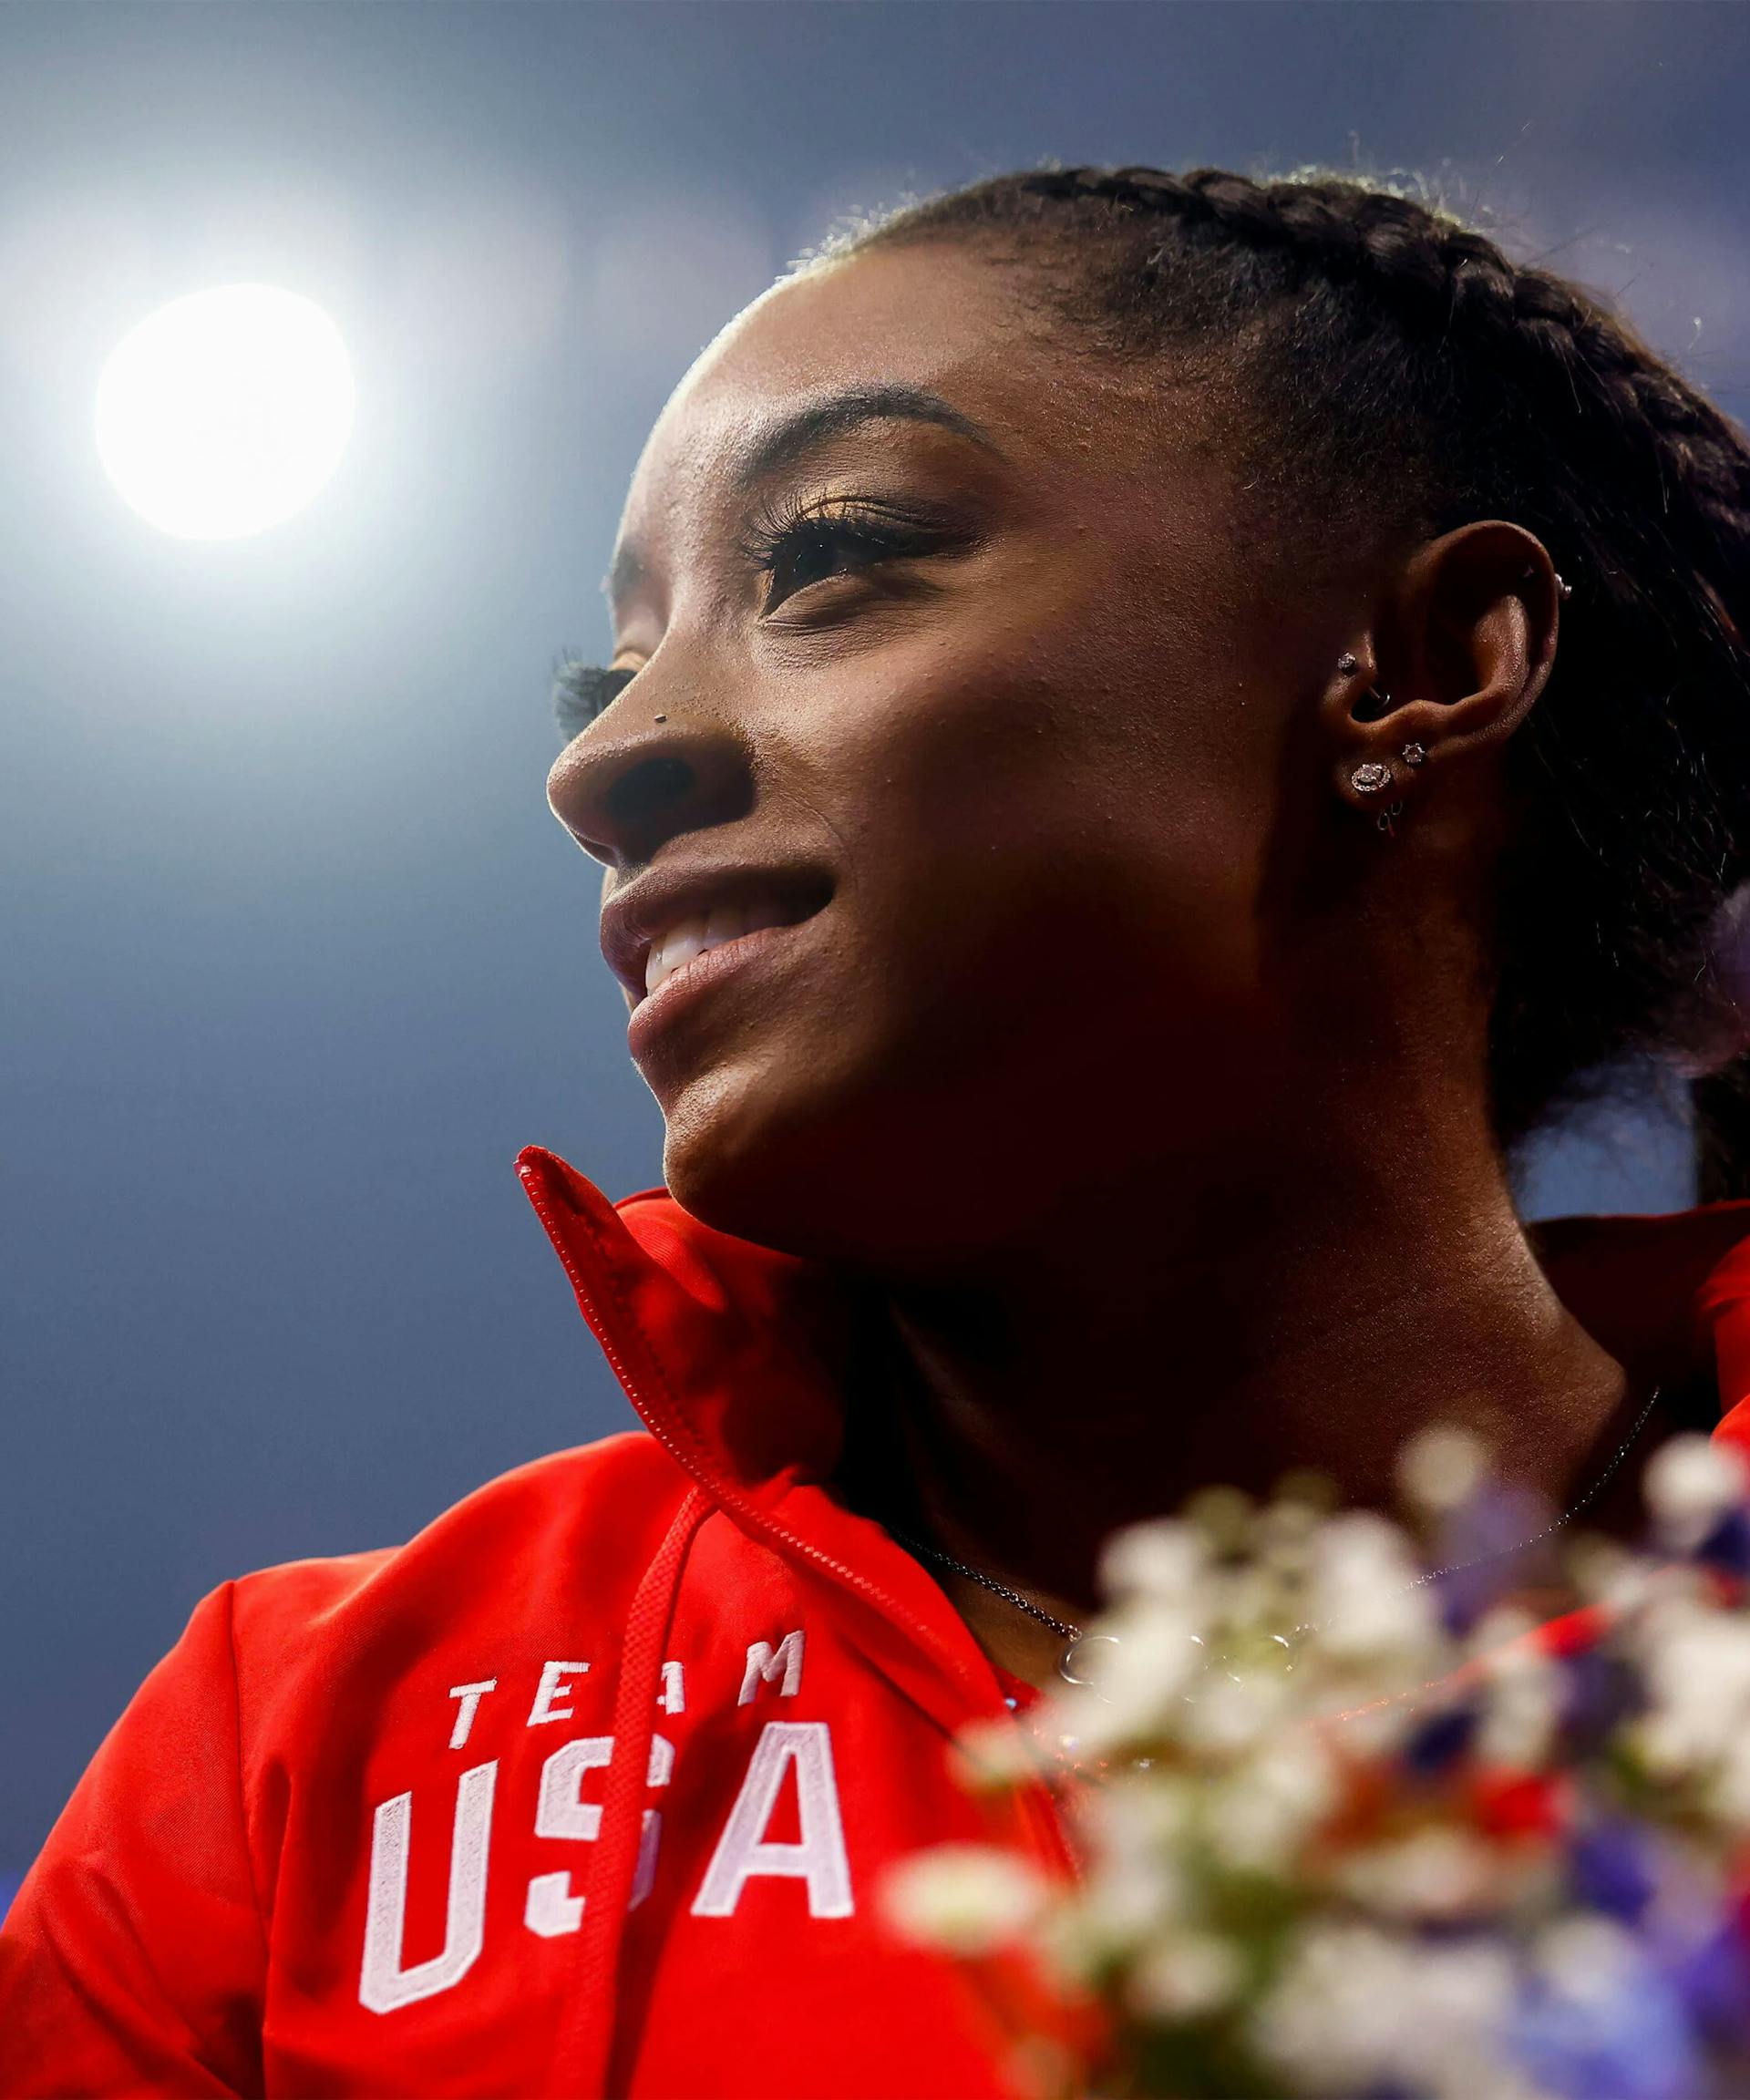 Ahead Of The Tokyo Olympics, Gymnast Simone Biles Opens Up About Sexual Abuse